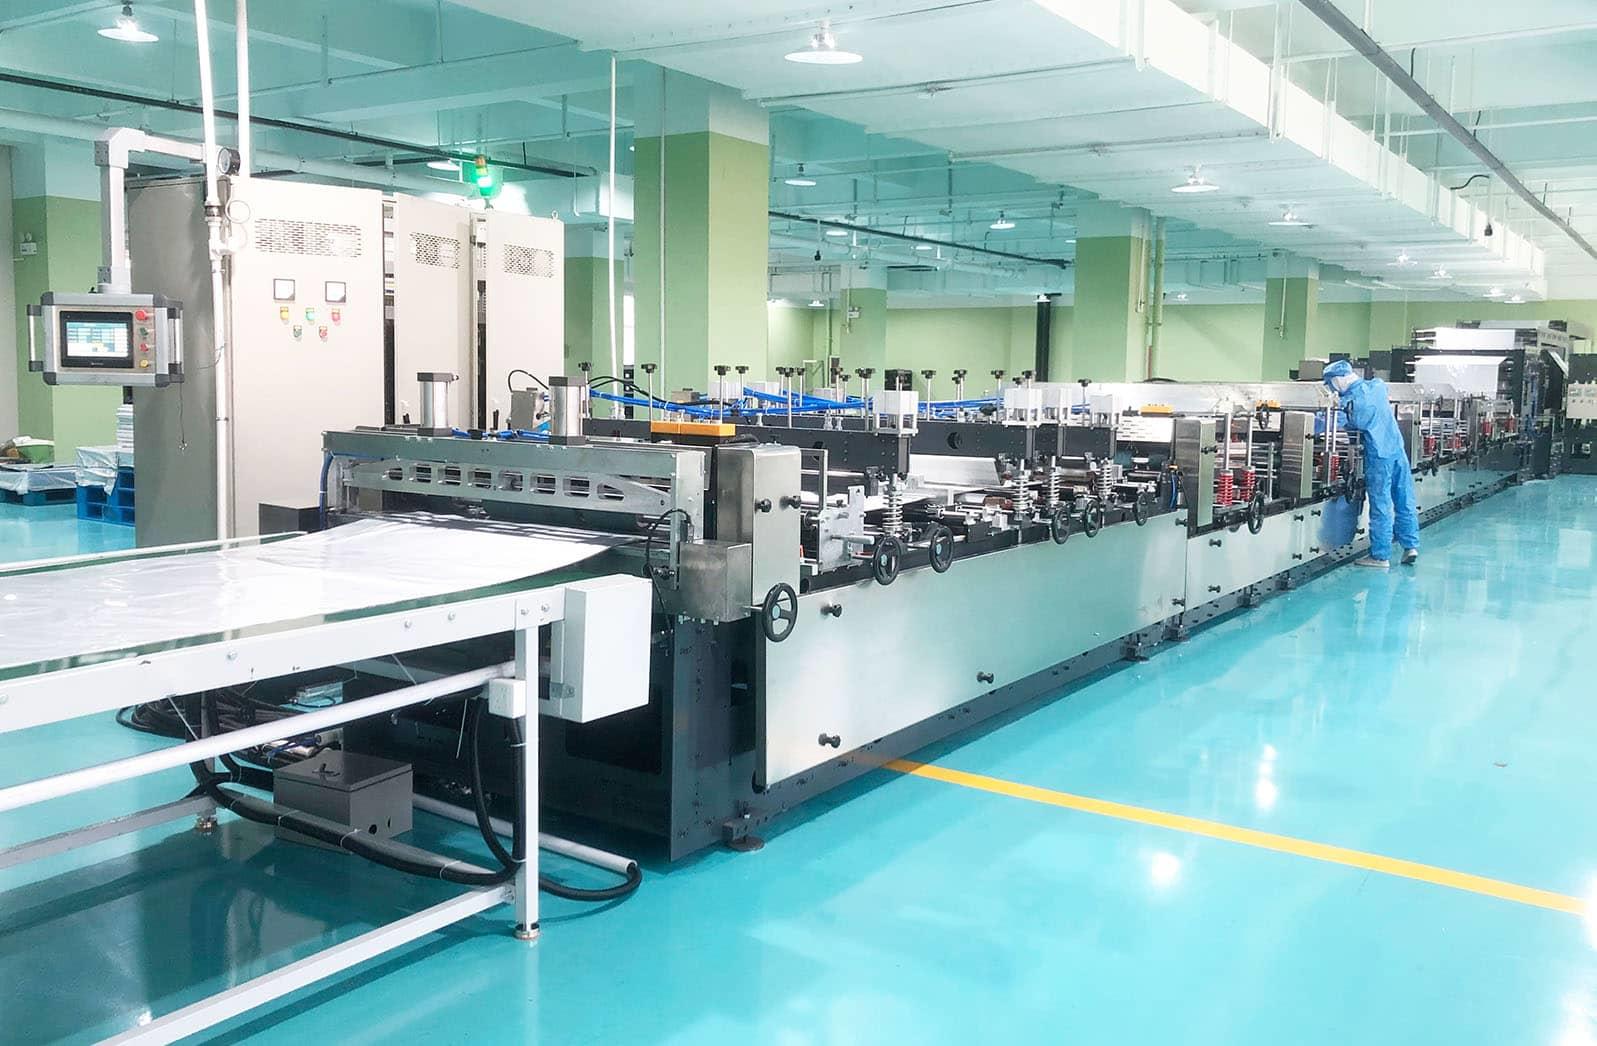  HANSIN's FIBC bag-making machine was brought into operation In November 2021